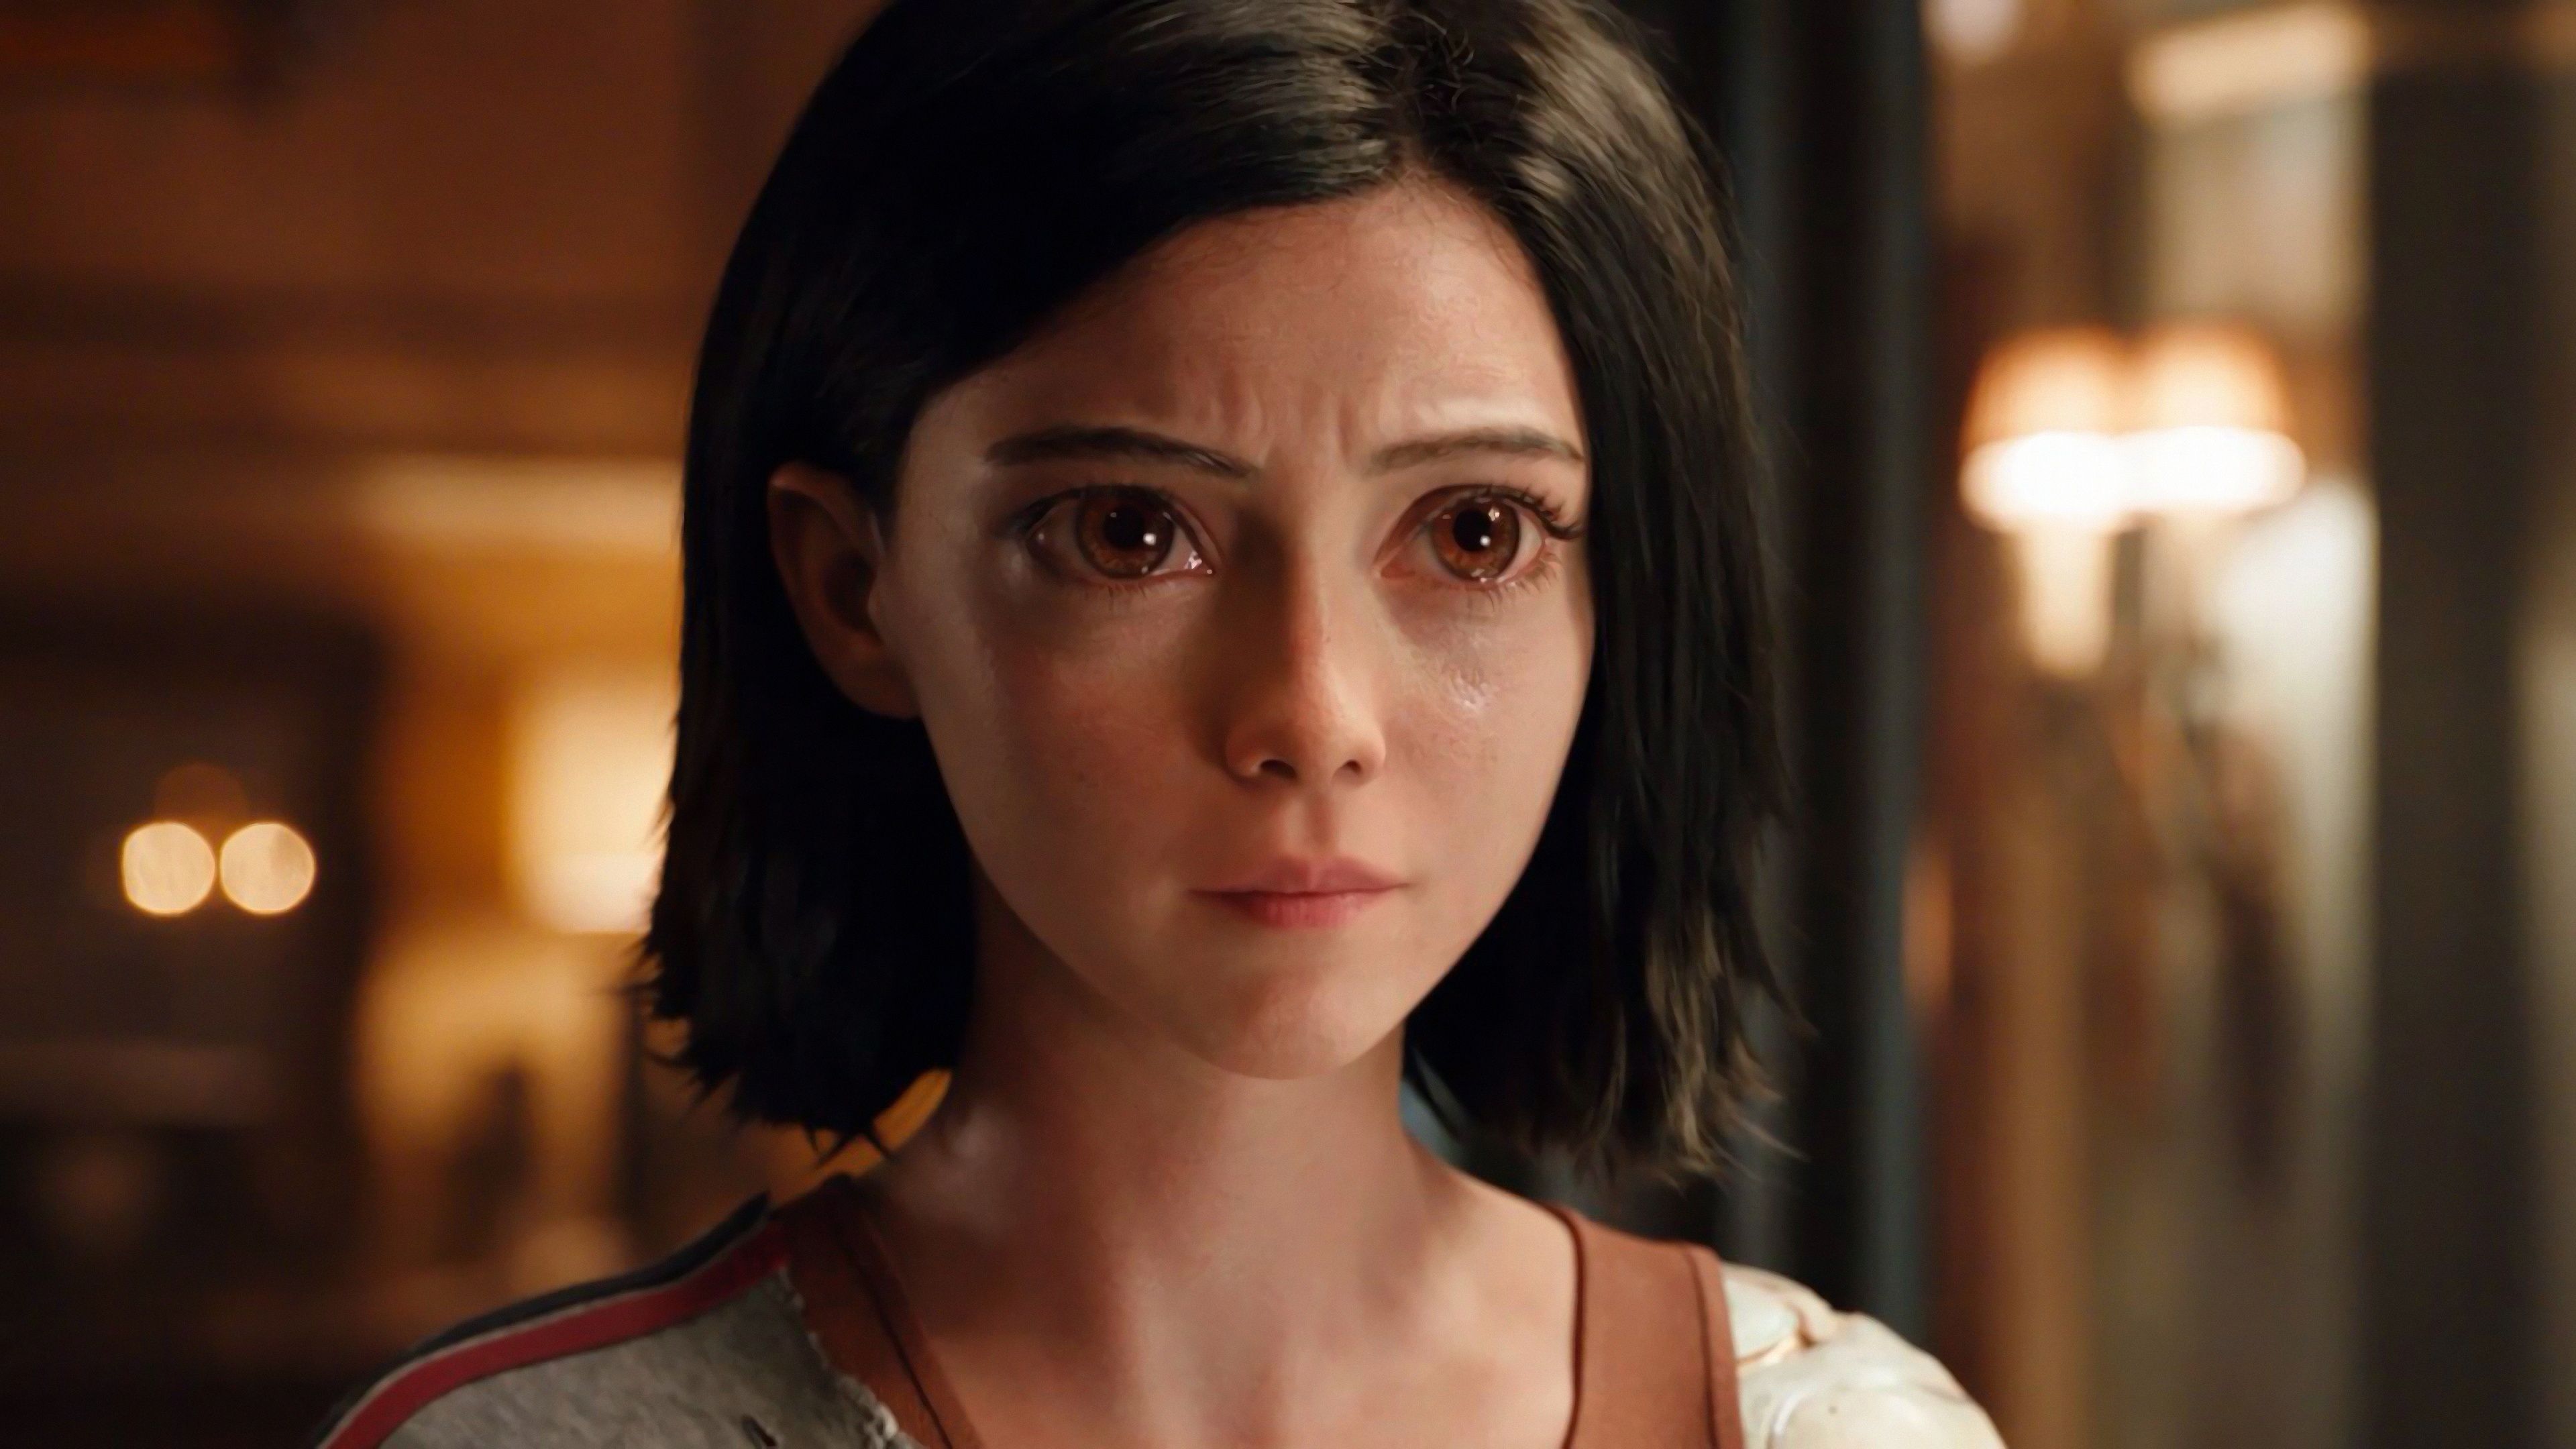 Mobile wallpaper: Brown Eyes, Movie, Black Hair, Alita (Alita: Battle Angel),  Alita: Battle Angel, 942907 download the picture for free.